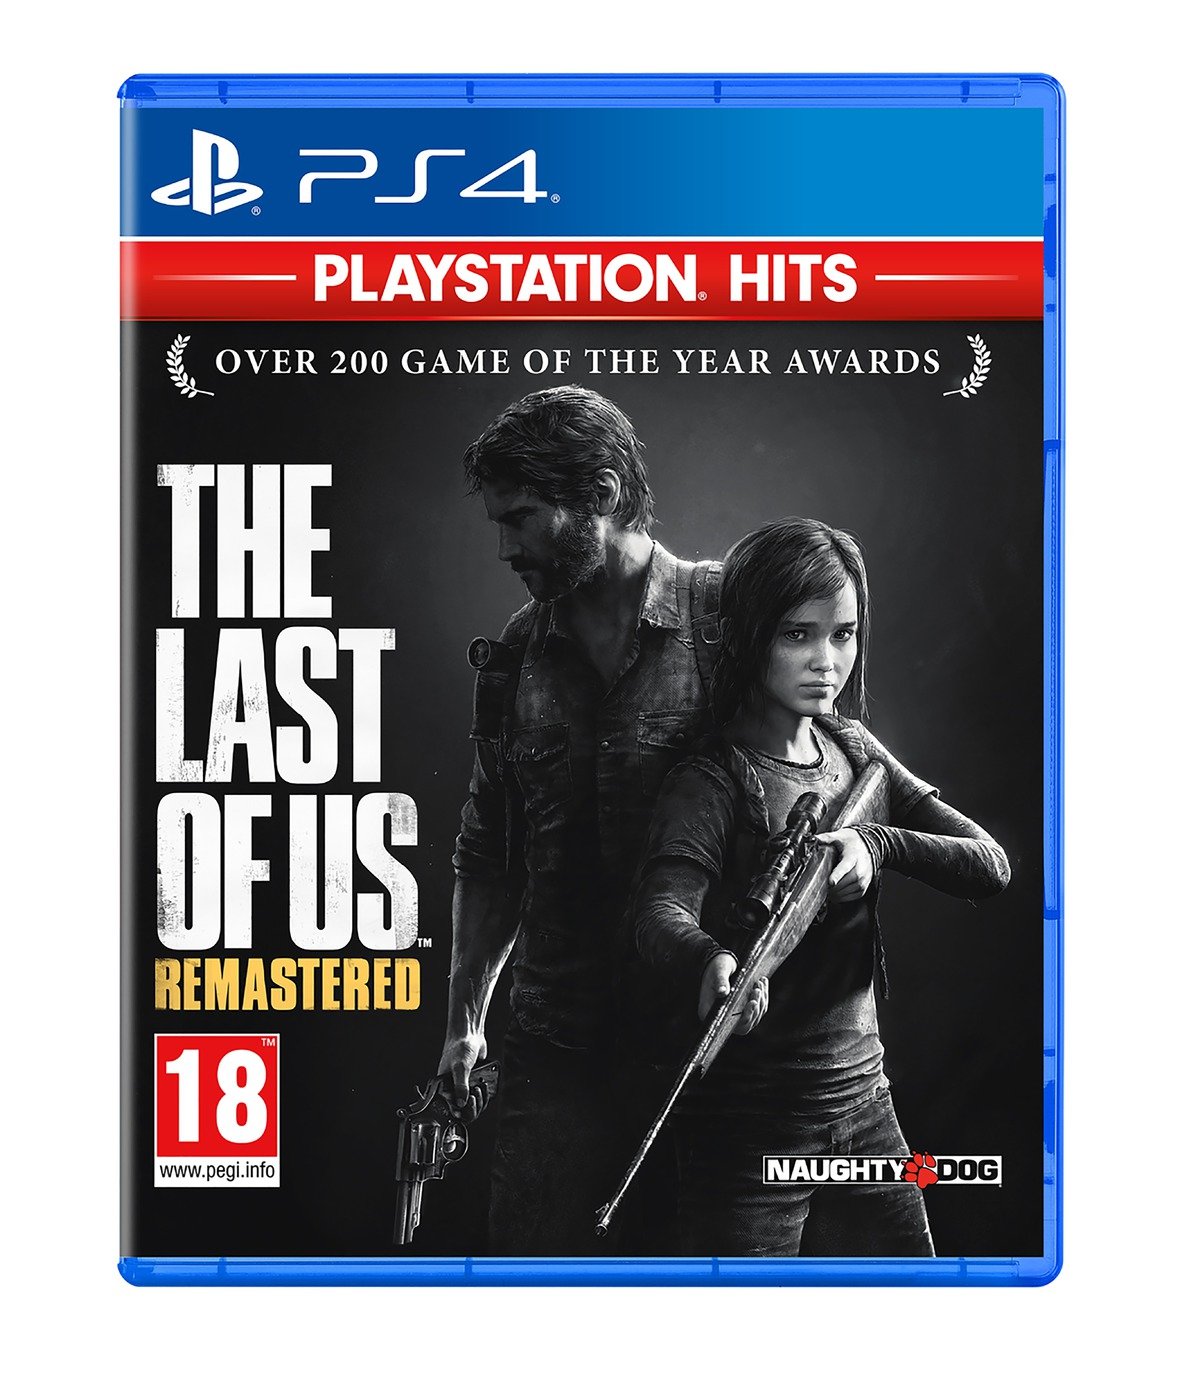 The Last Of Us PS4 Remastered Game